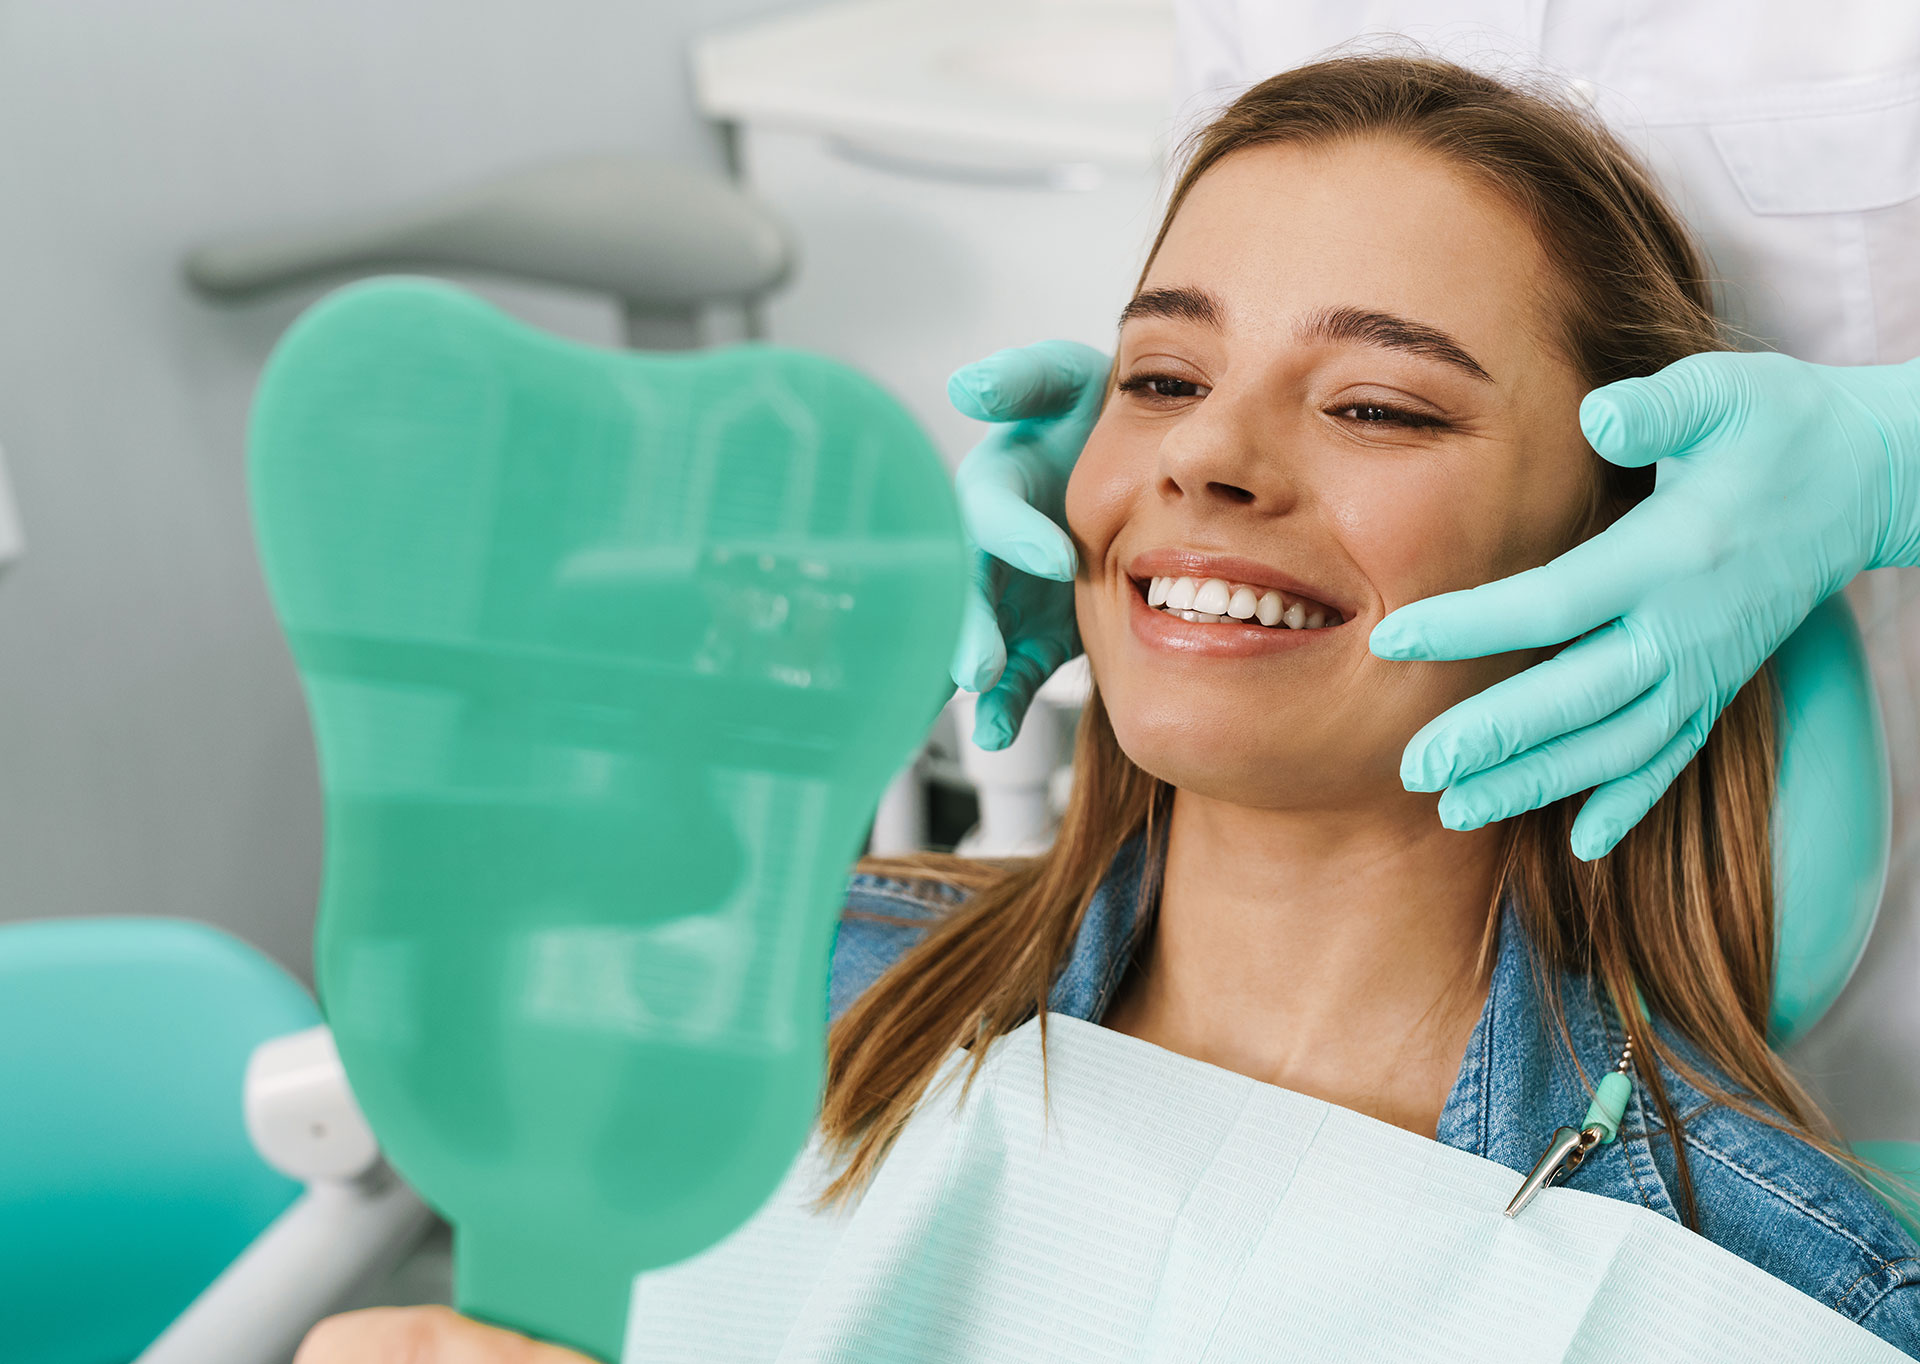 A woman in a dental chair, smiling at the camera, with a dentist s hands holding up a clear plastic model of teeth.